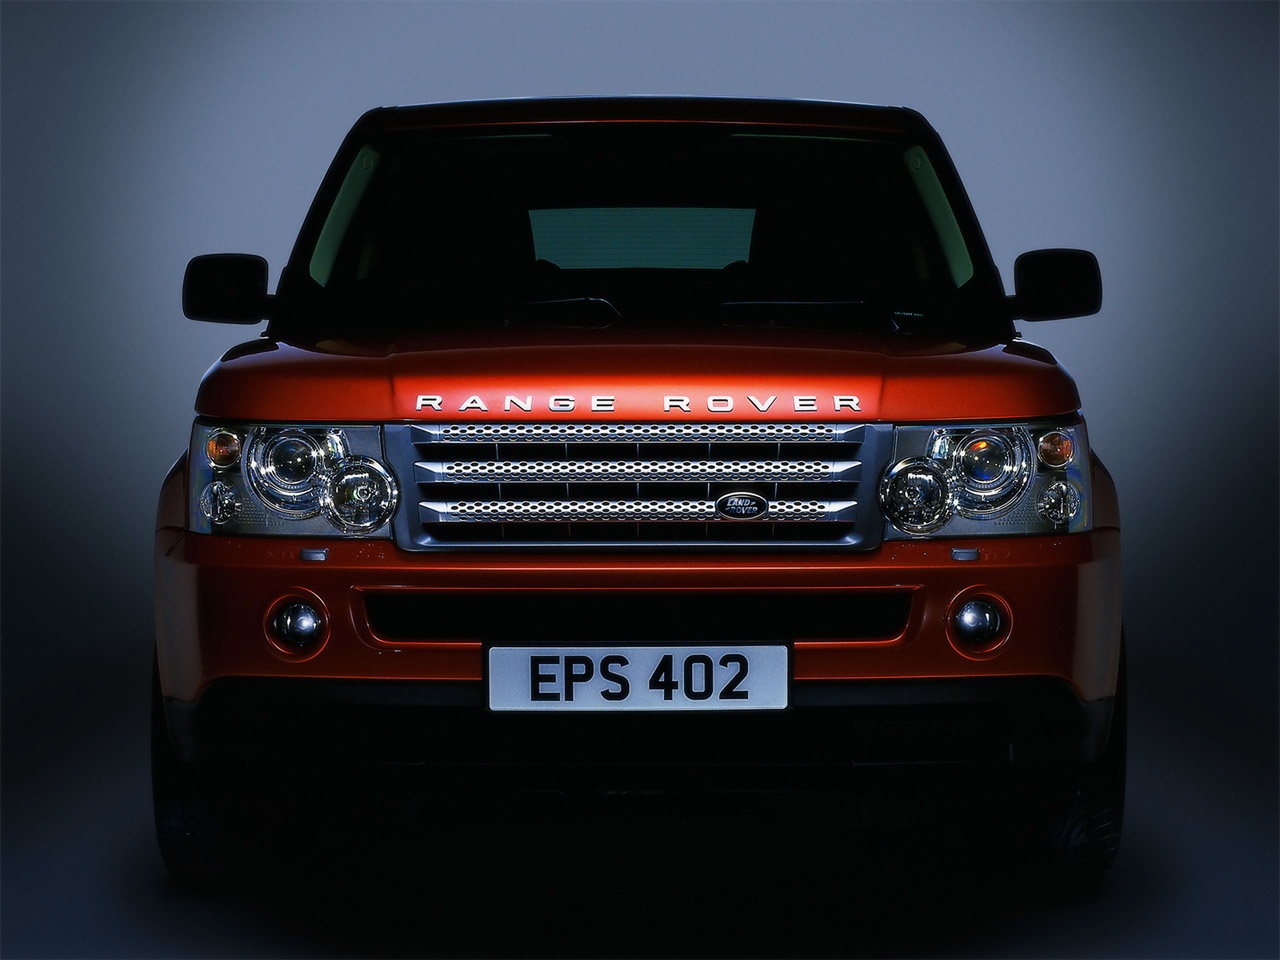 Range Rover Wallpaper For Mobile Image Collections Of